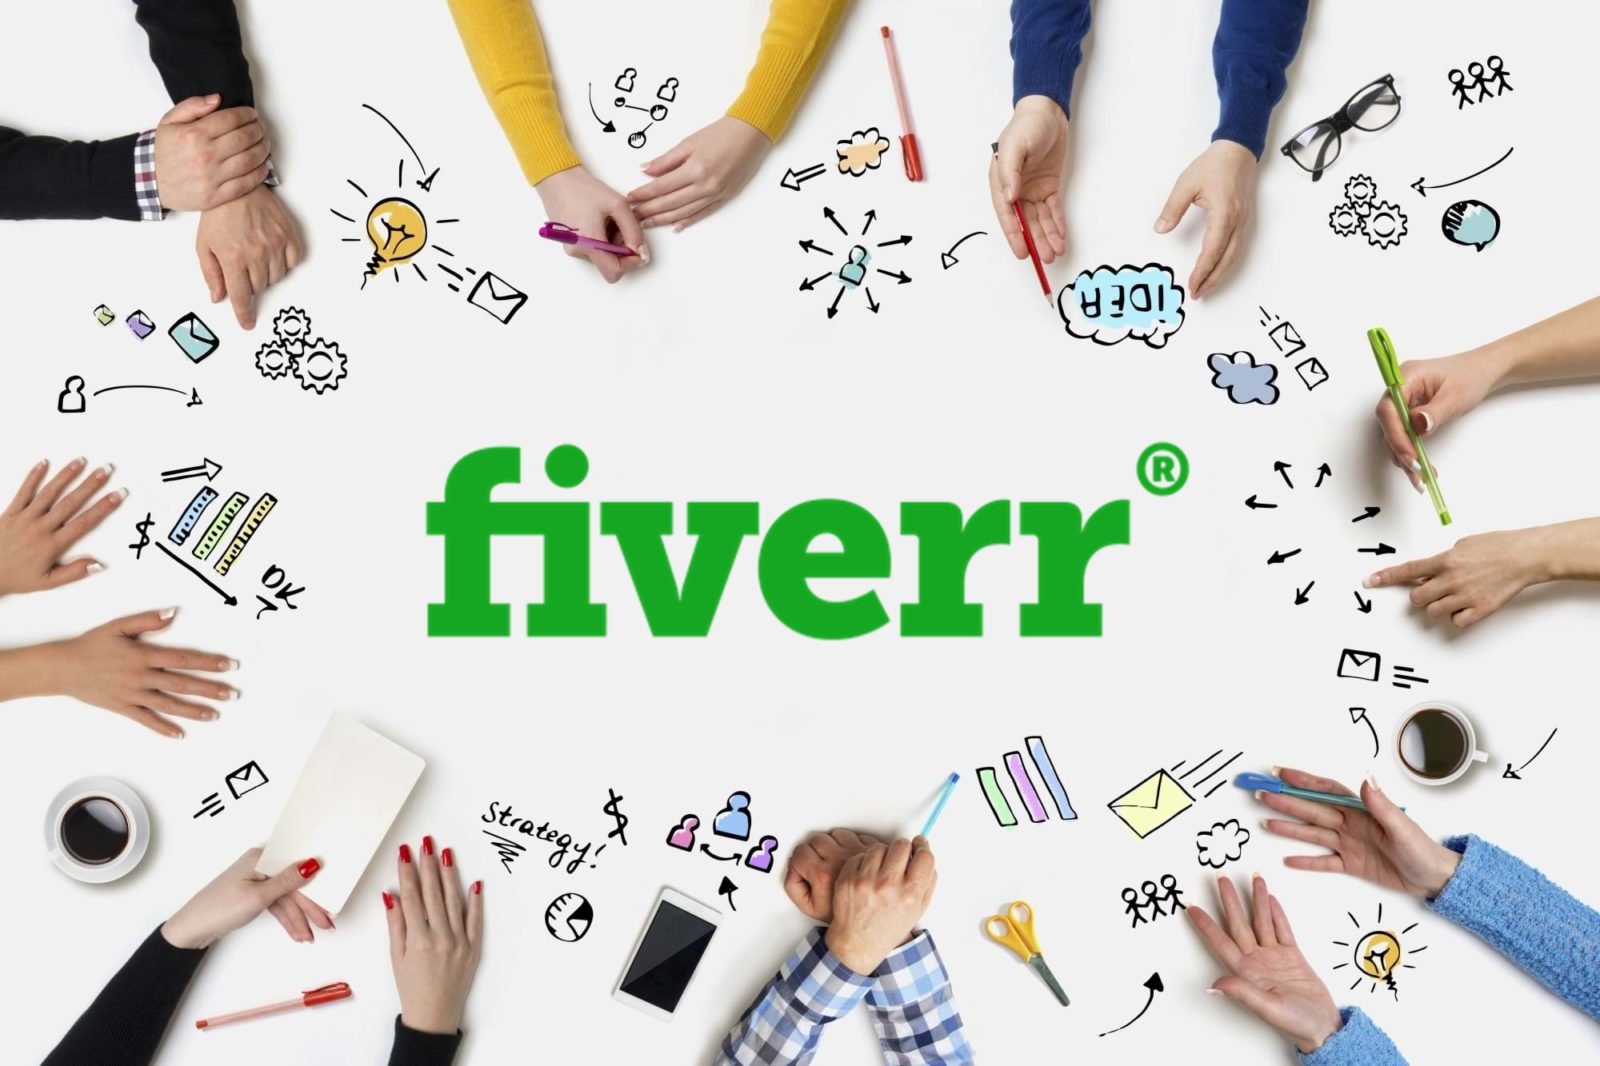 can we do assignments on fiverr